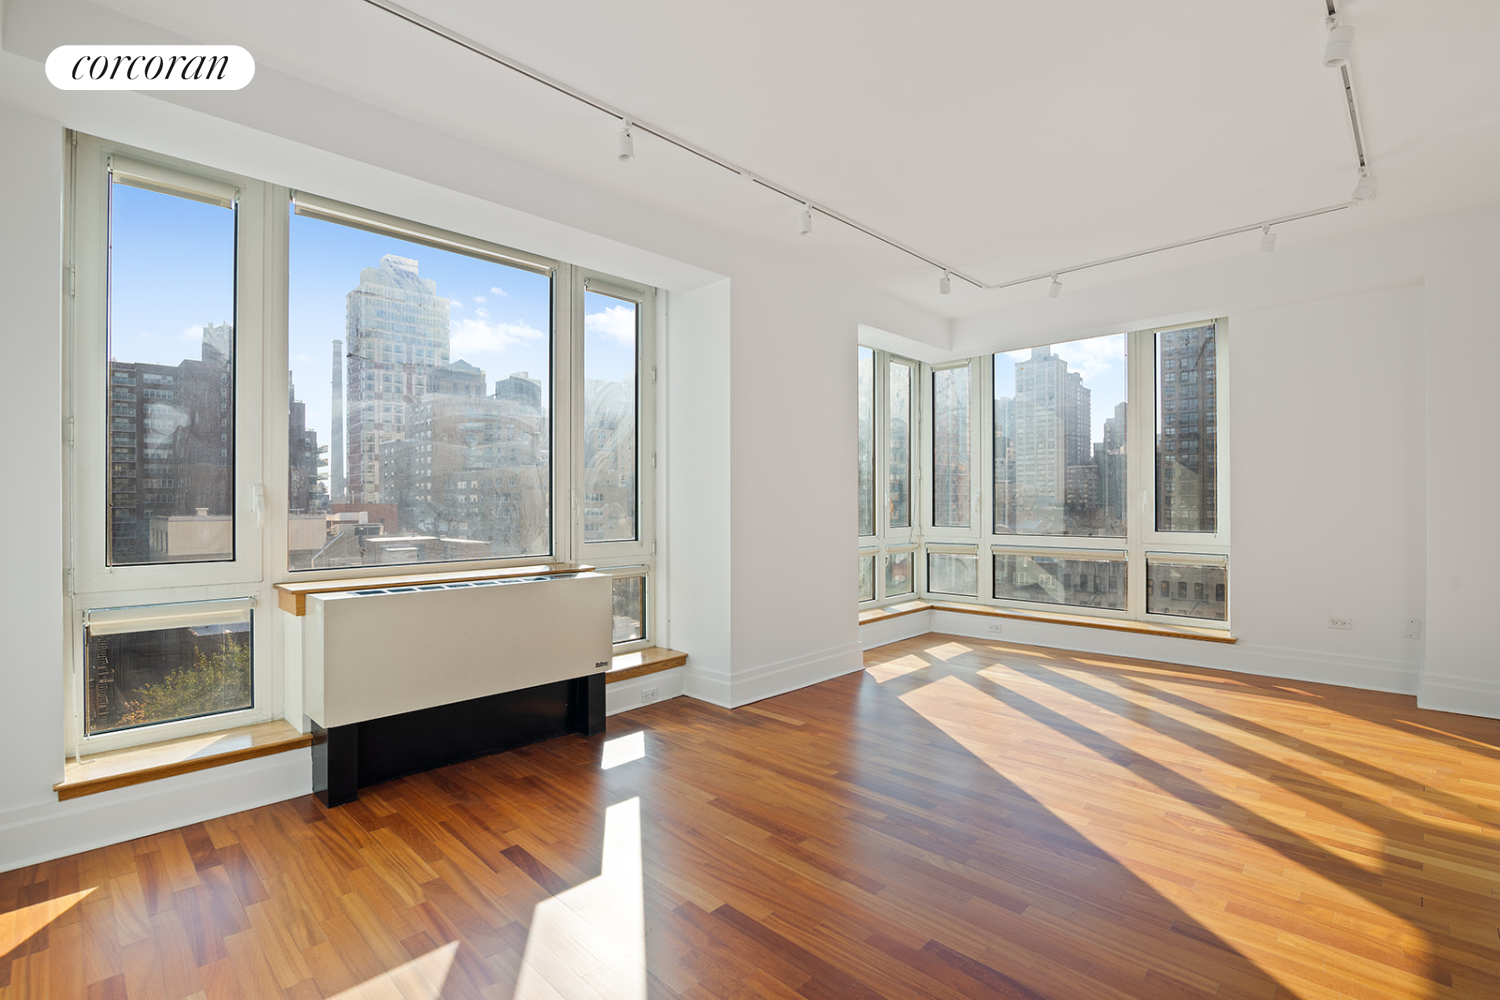 300 East 77th Street 9A, Lenox Hill, Upper East Side, NYC - 2 Bedrooms  
2.5 Bathrooms  
5 Rooms - 